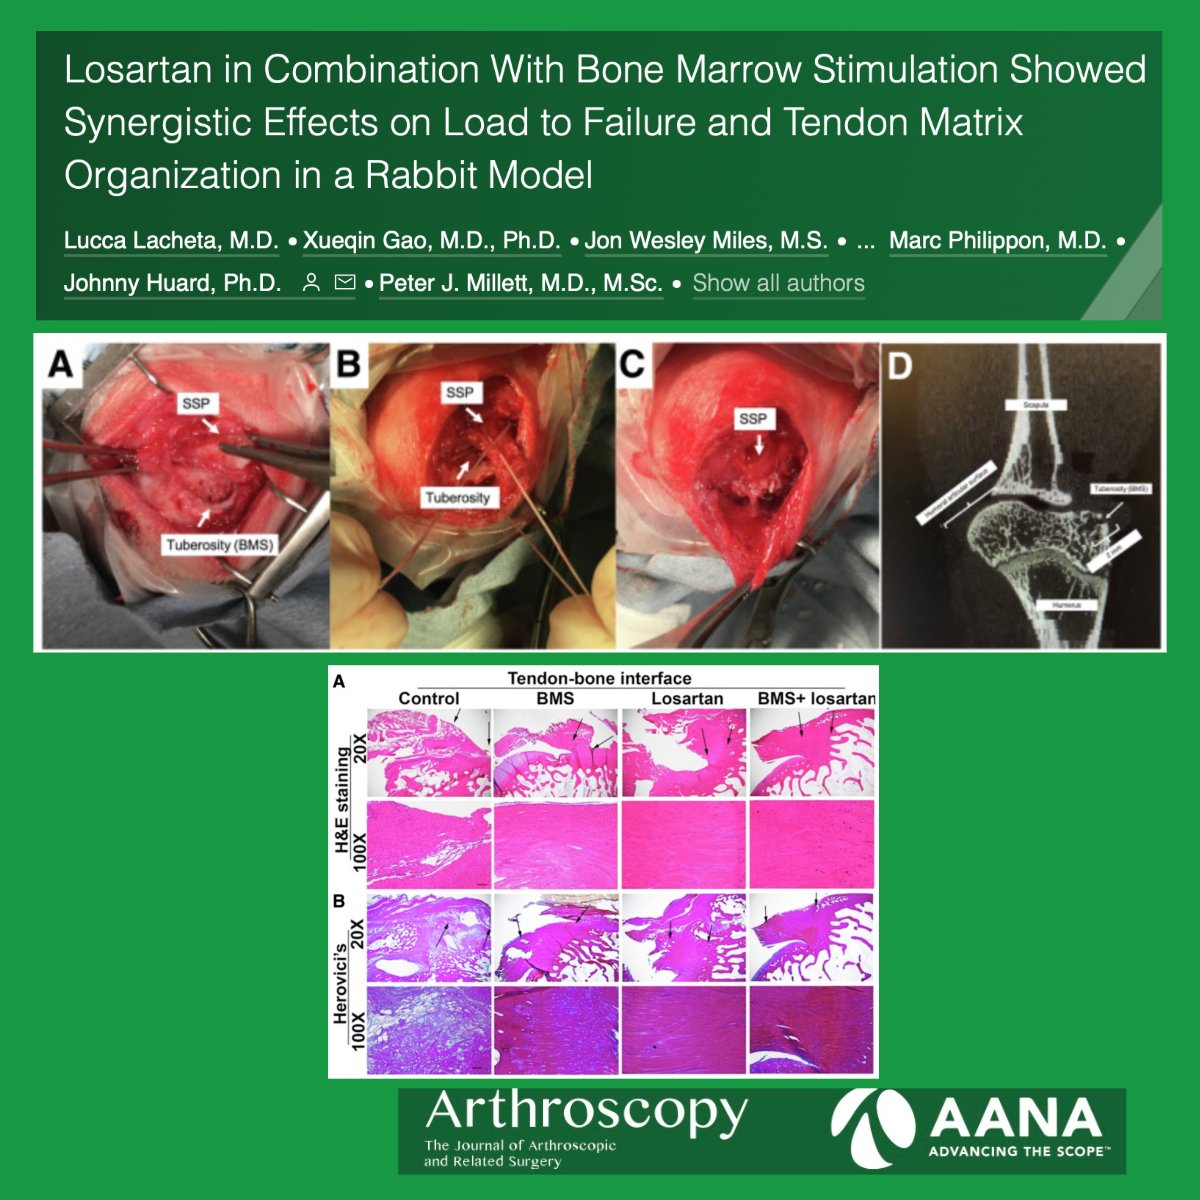 Losartan in Combination With Bone Marrow Stimulation Showed Synergistic Effects on Load to Failure and Tendon Matrix Organization in a Rabbit Model @MillettMD ow.ly/nkO850QeRCn